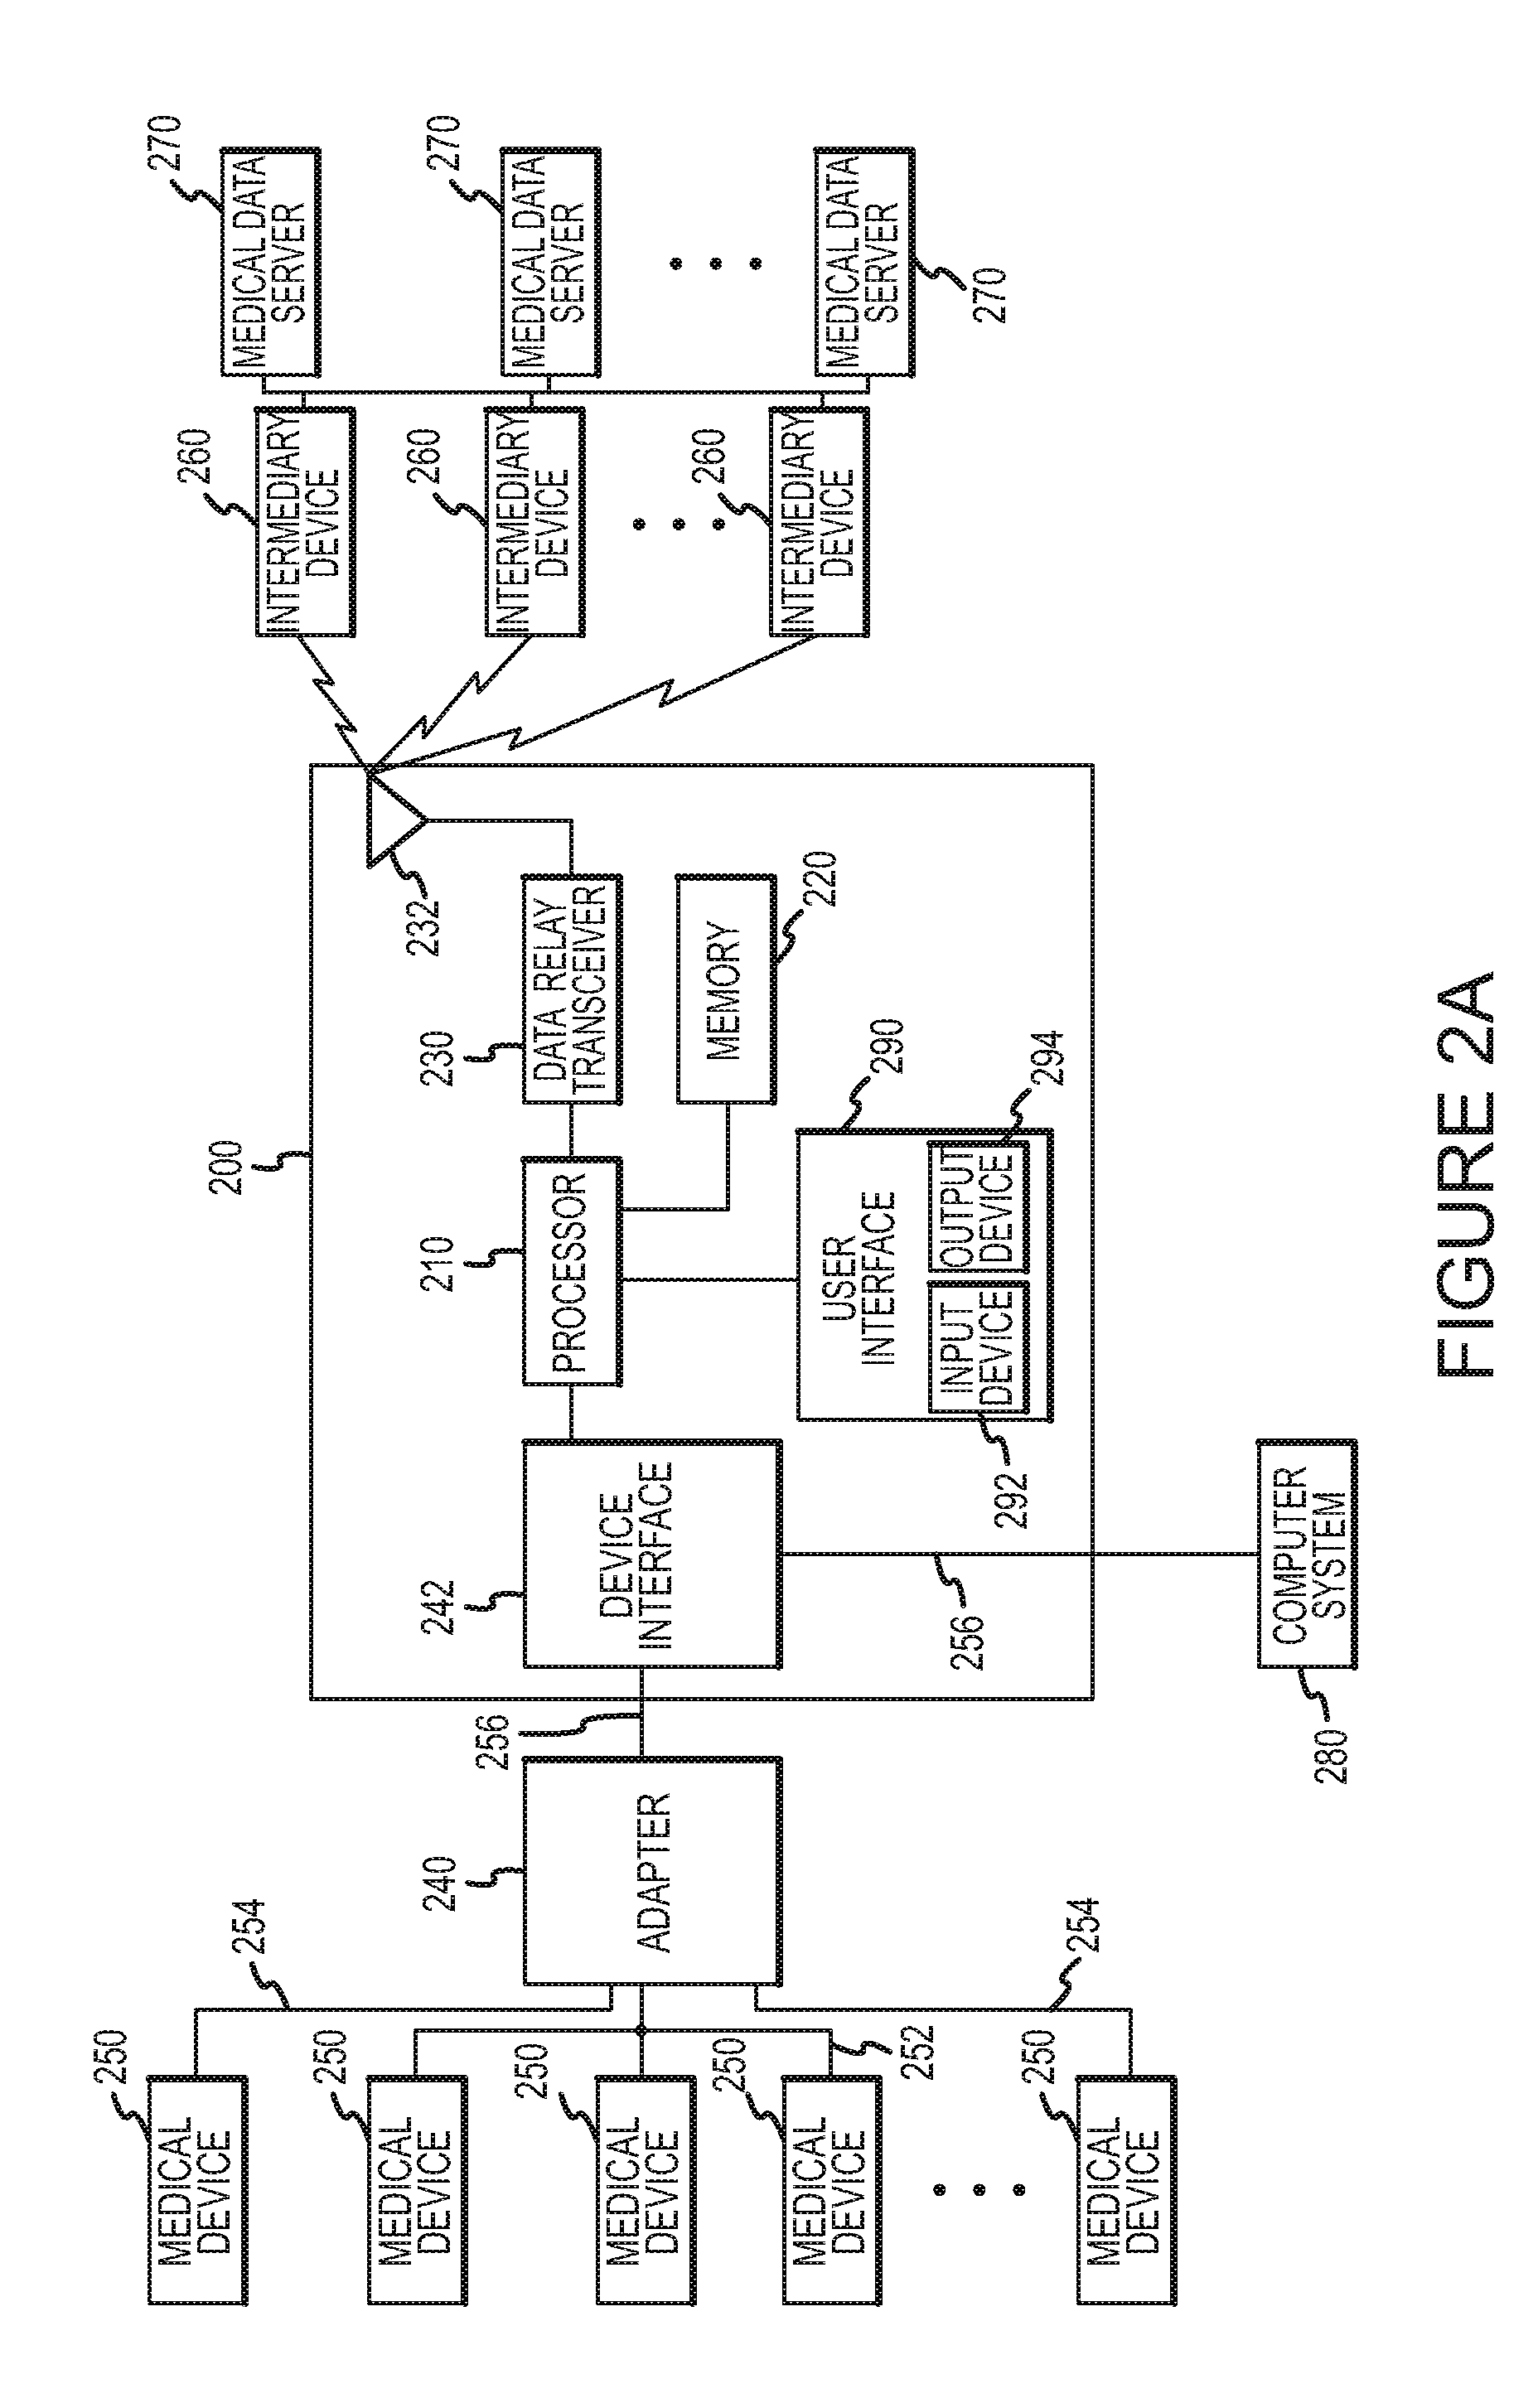 Systems and methods for adapter-based communication with a medical device